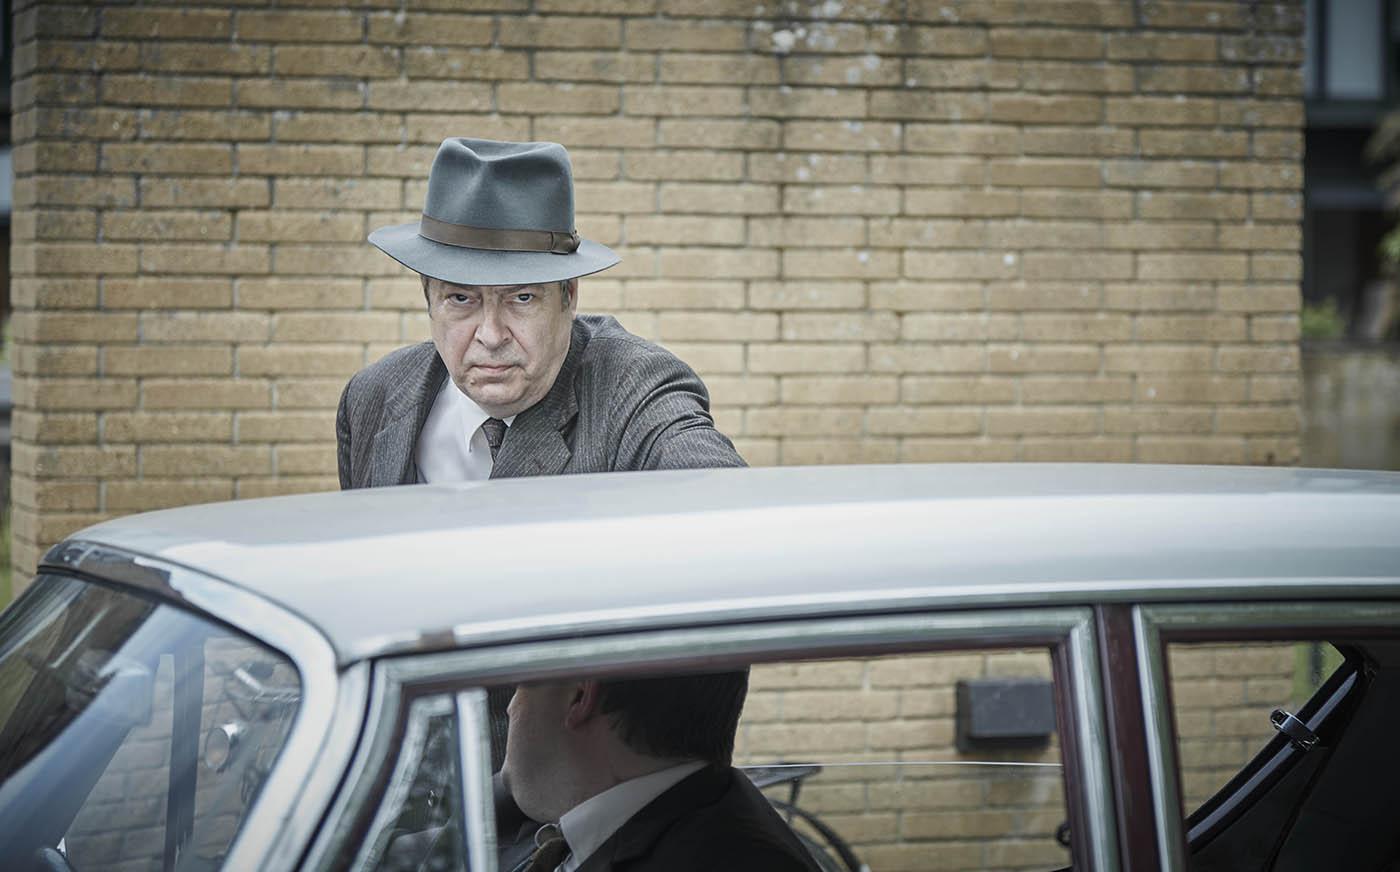 DI Thursday in Endeavour. Photo: ITV Plc and Masterpiece